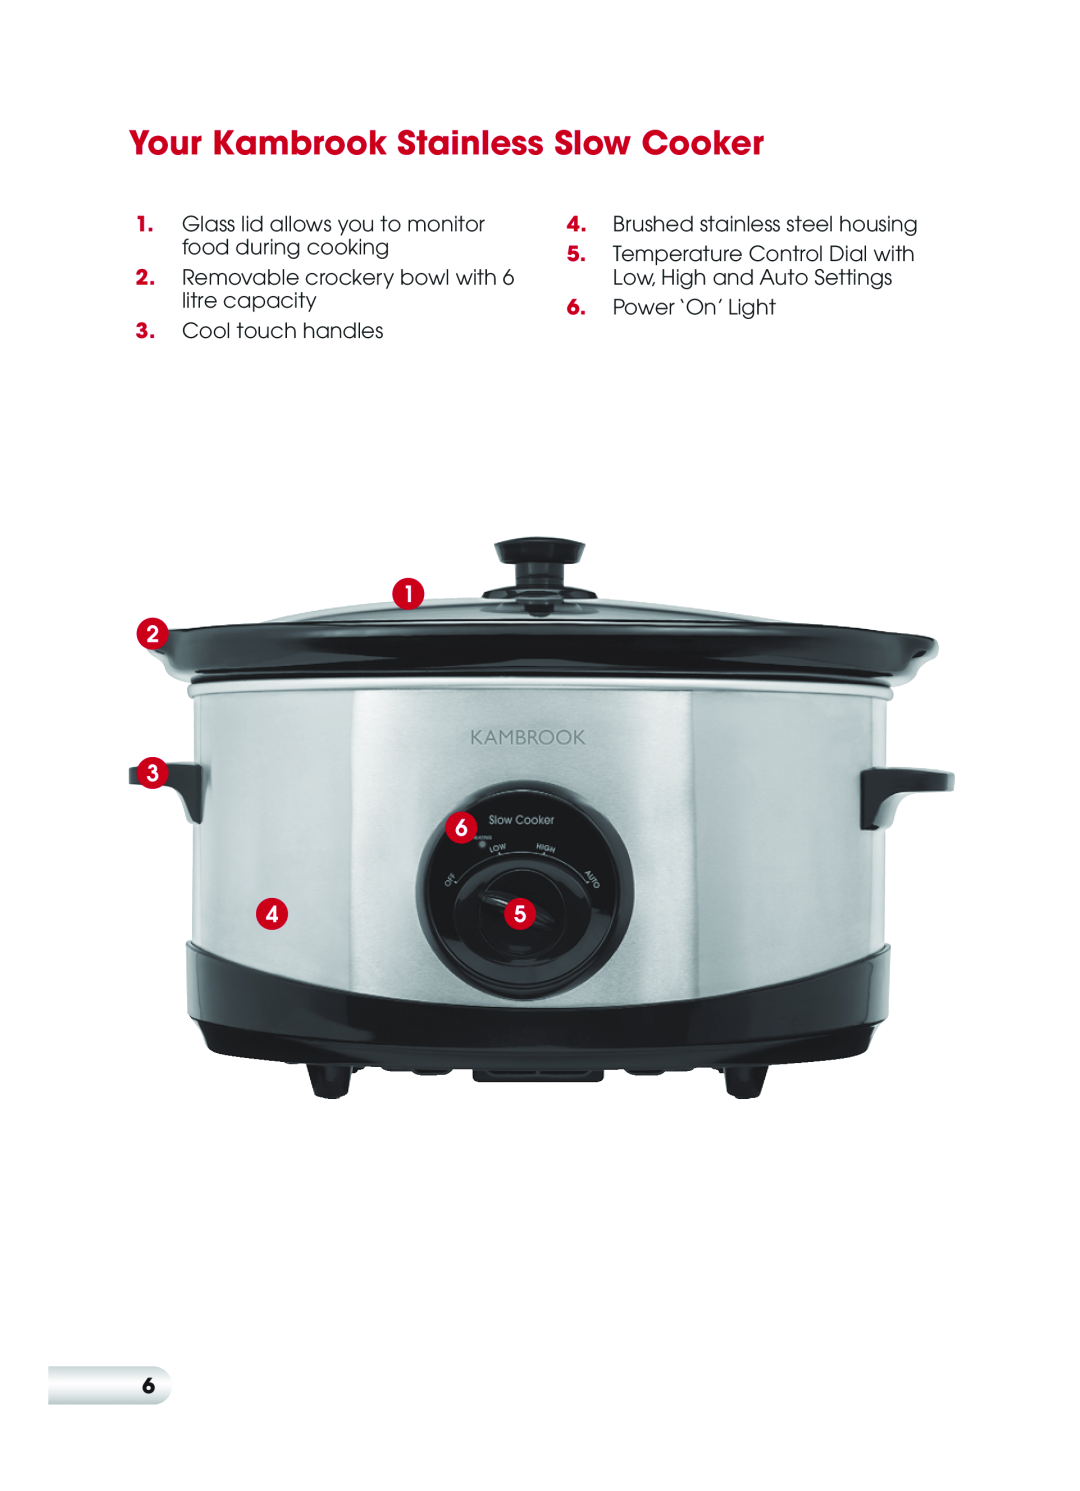 Kambrook KSC110 Your Kambrook Stainless Slow Cooker, Removable crockery bowl with 6 litre capacity, Cool touch handles 